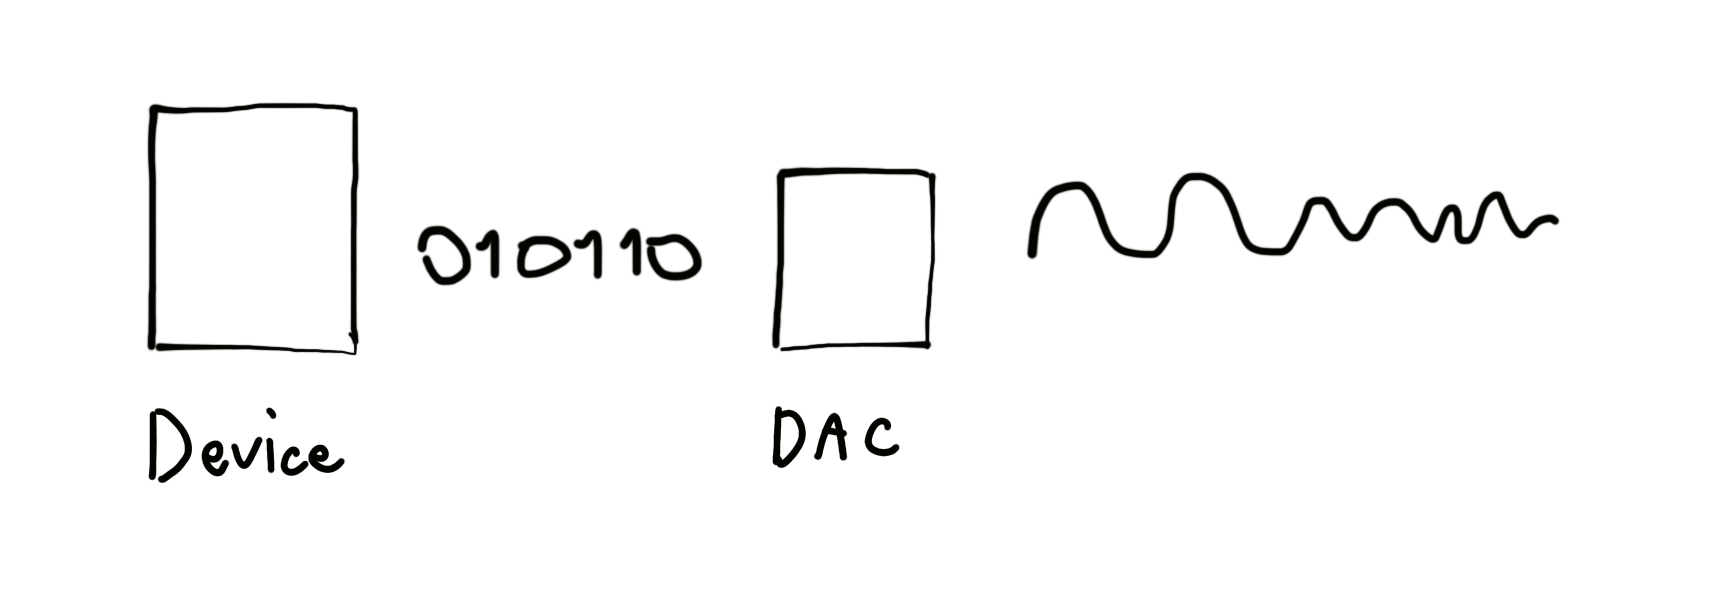 How DAC works